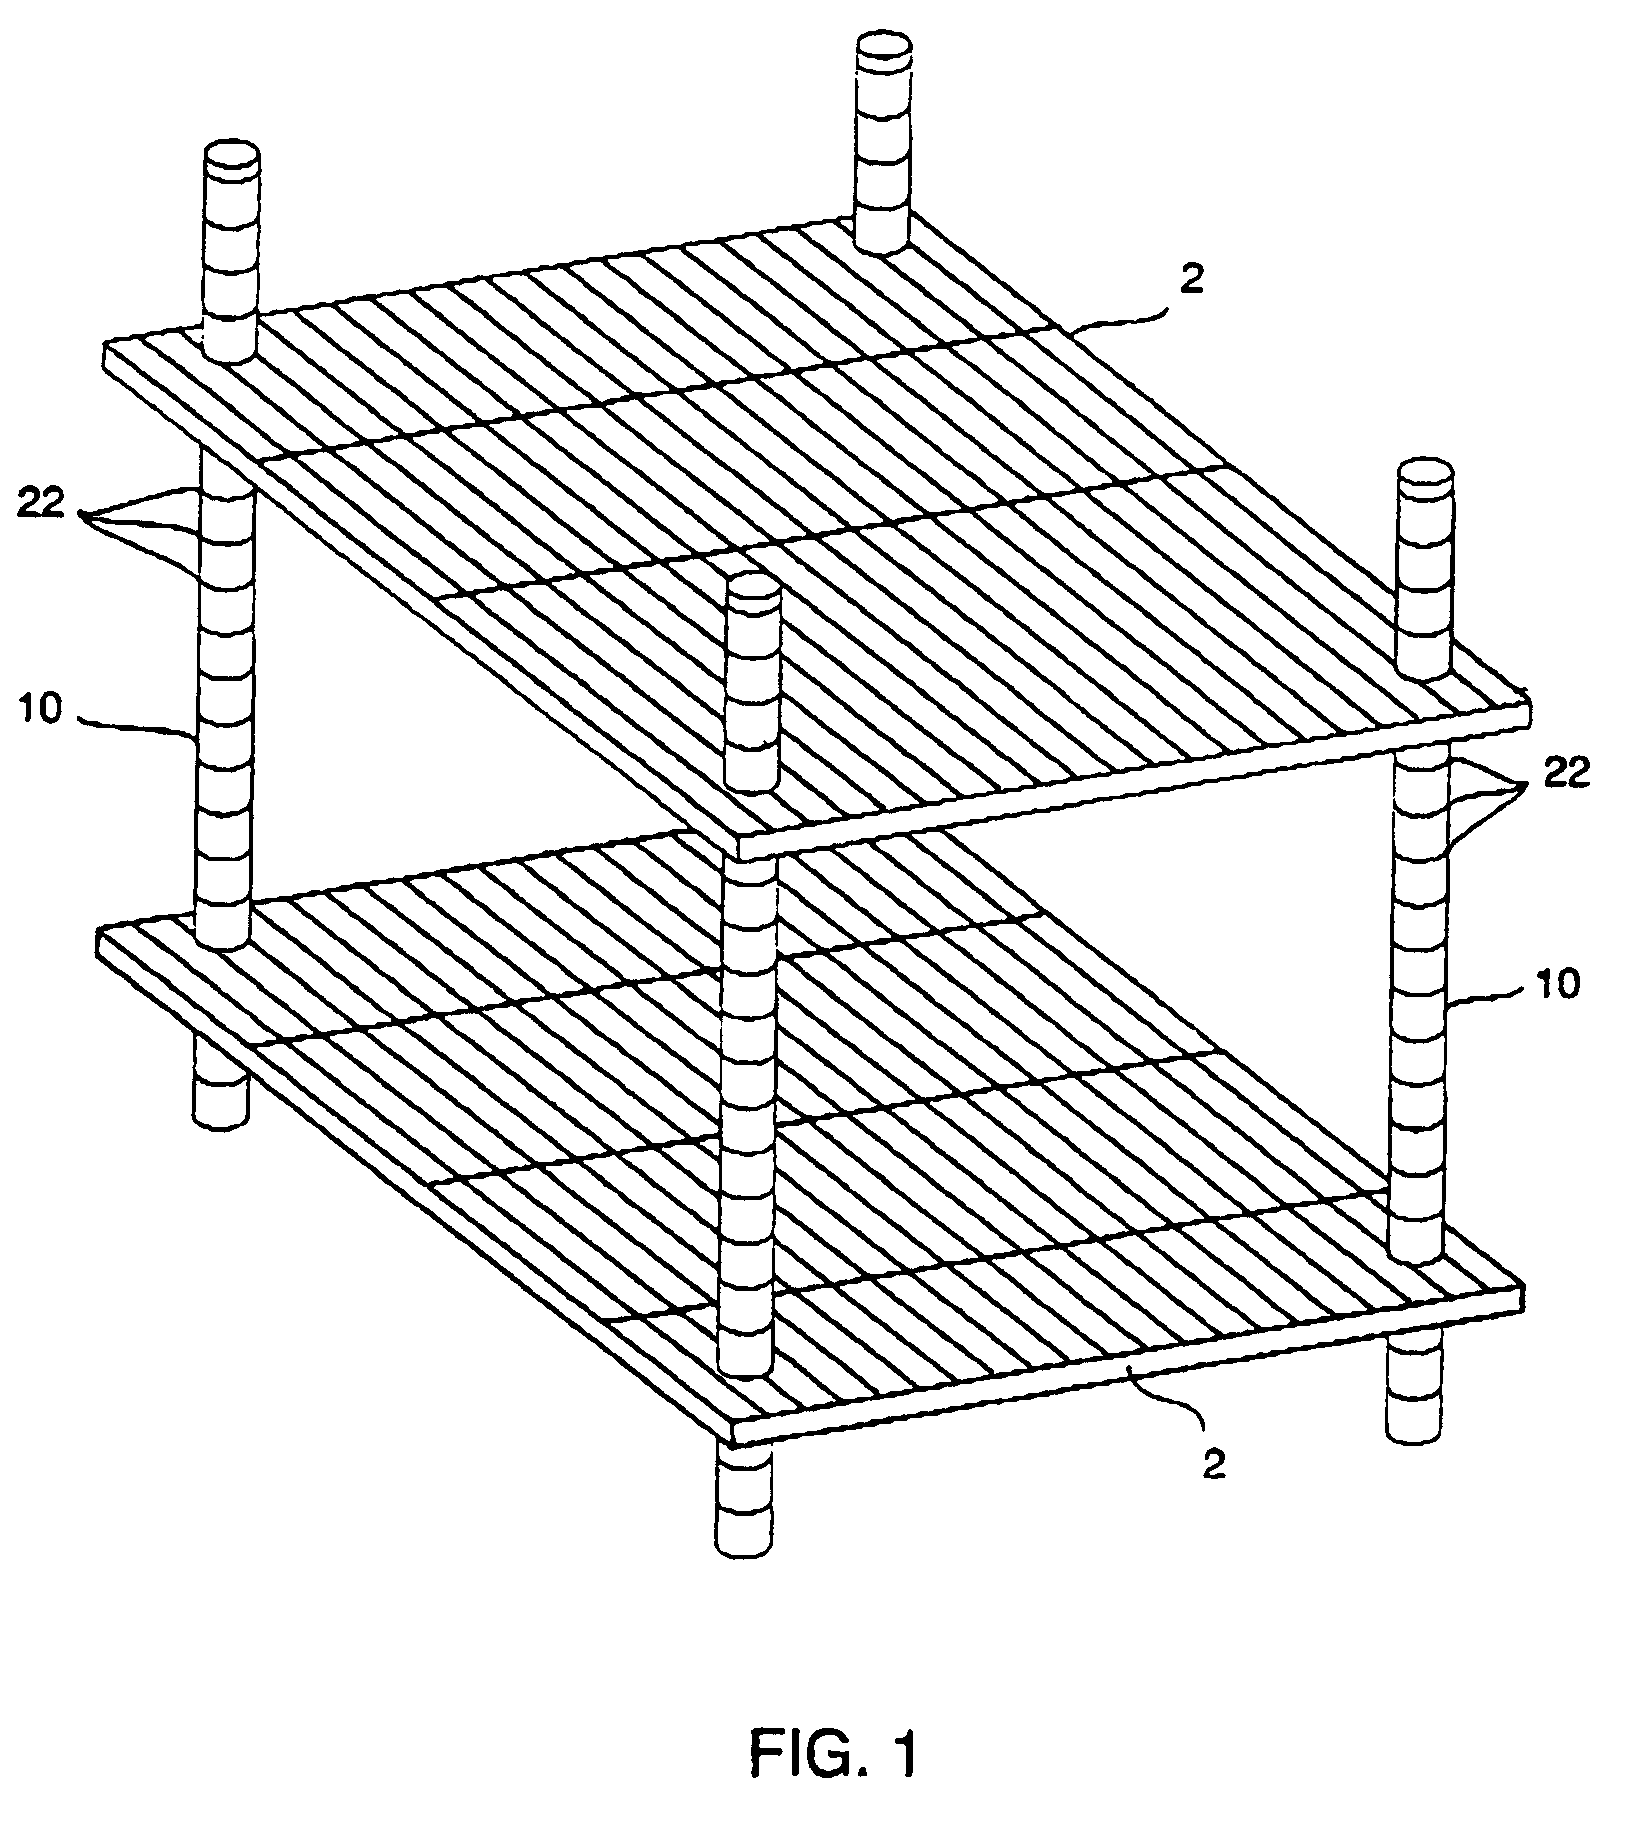 Pole connector assembly and method for racks and shelving